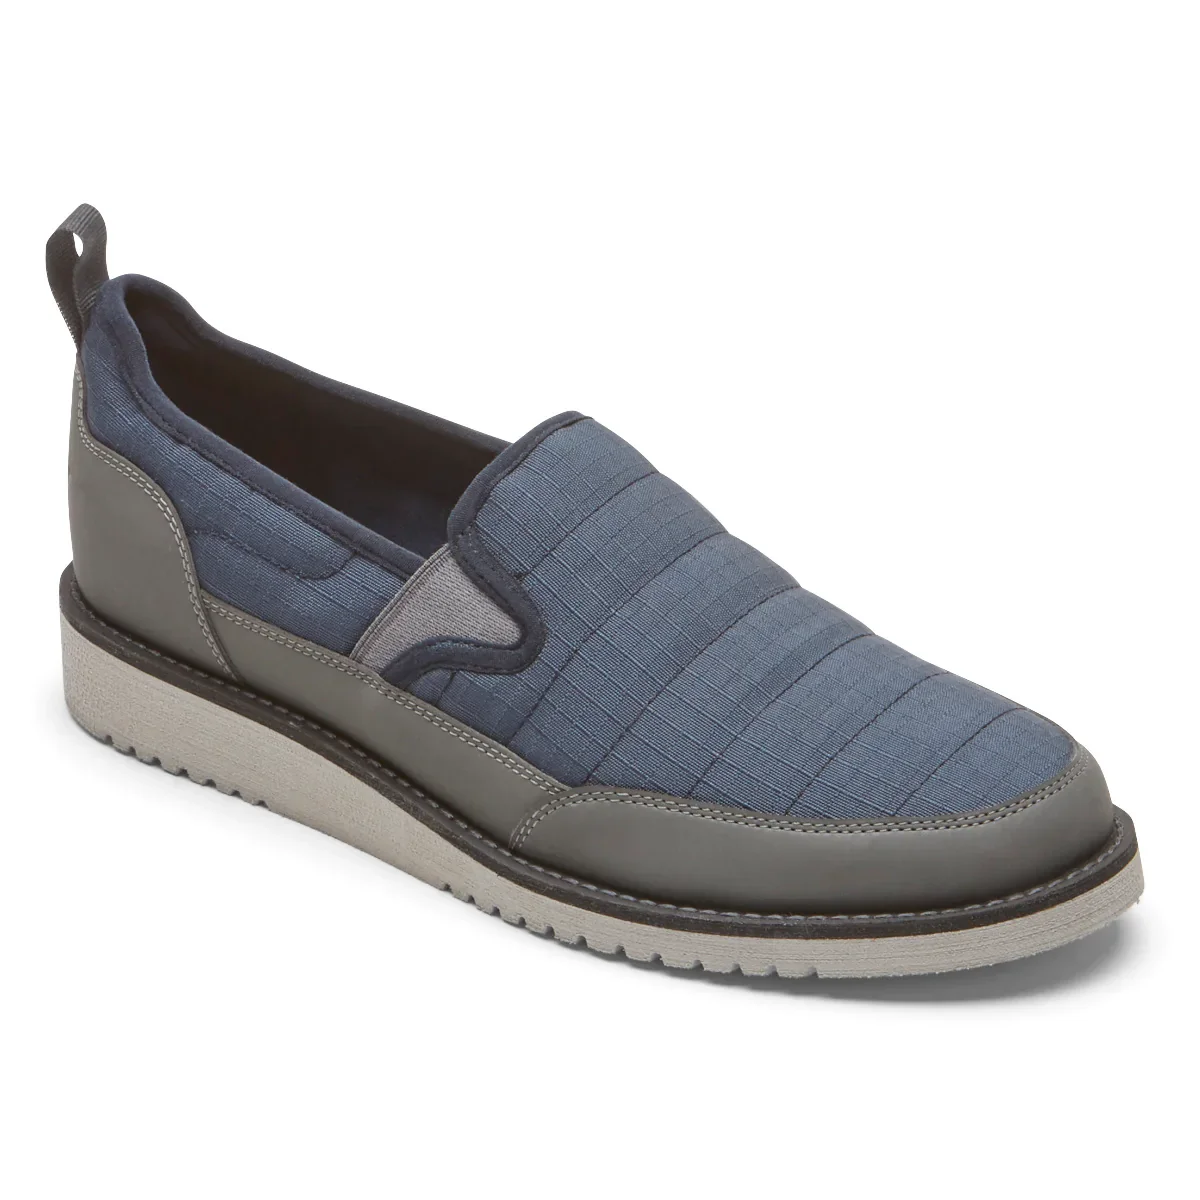 Men's Axelrod Quilted Slip-On